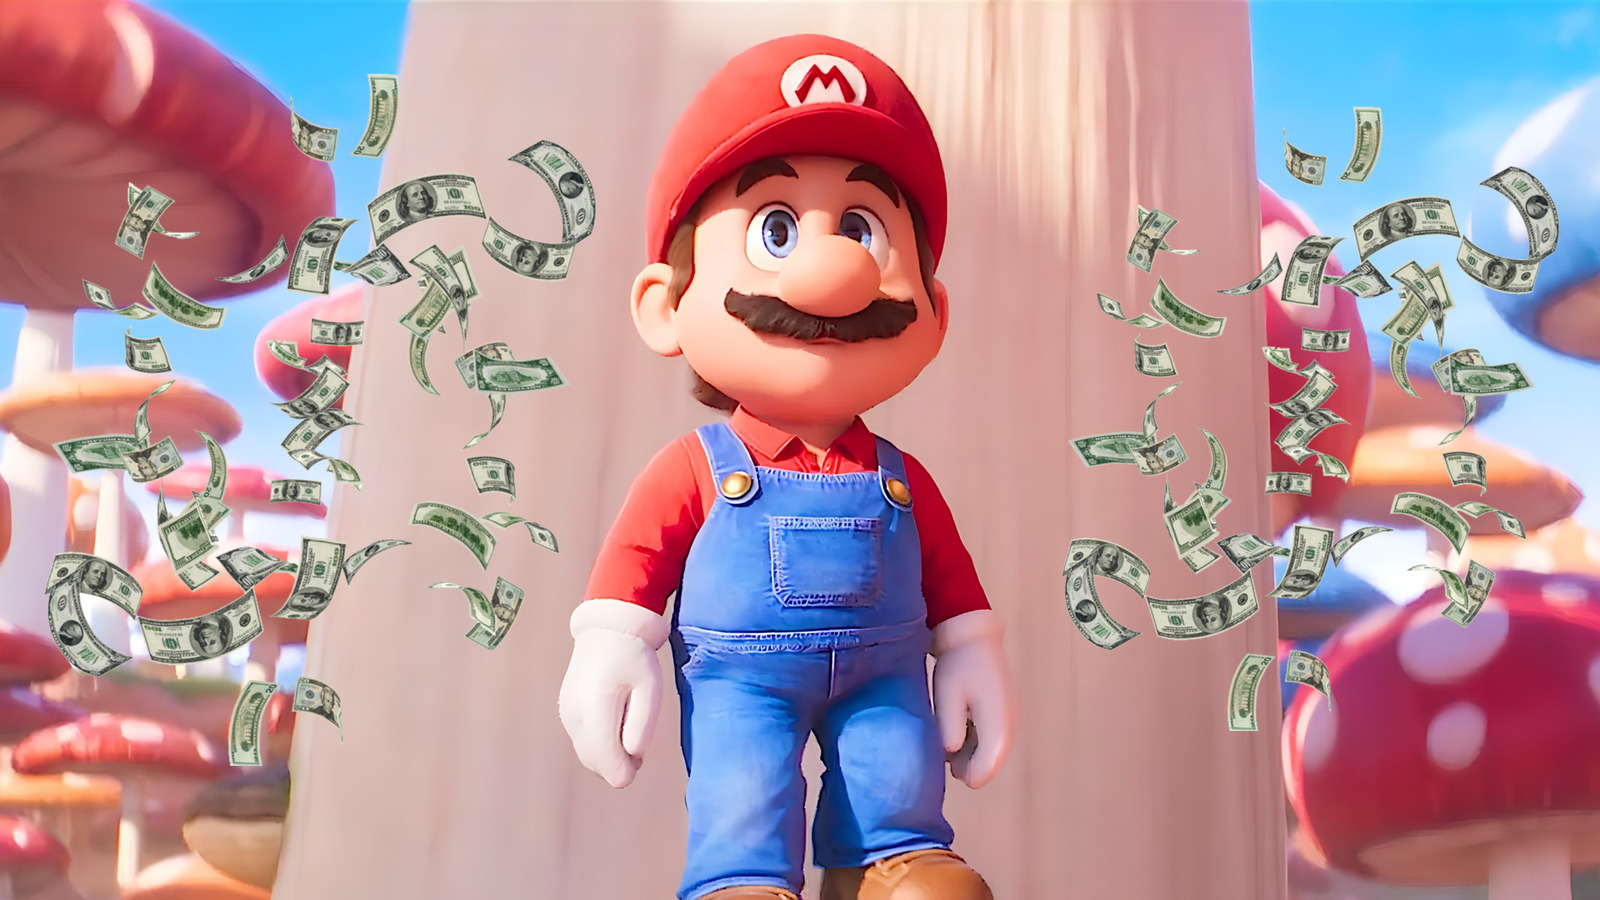 The Super Mario Bros. Movie Smashed The Box Office Record For A Video